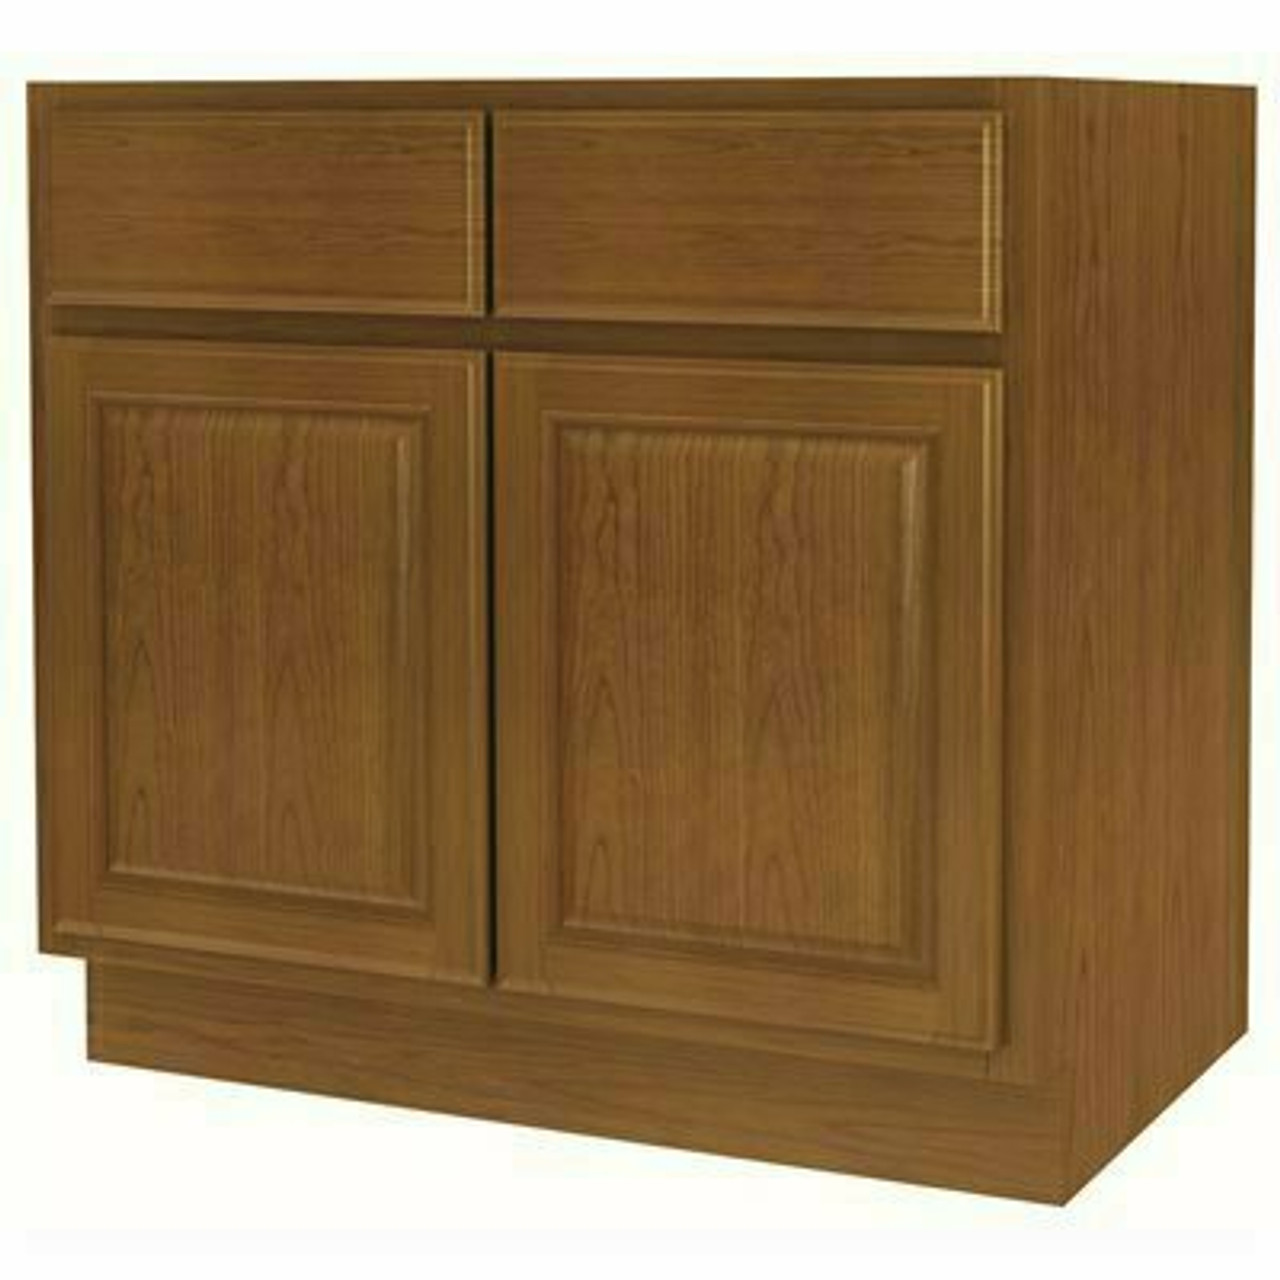 Sunco Base Cabinet Two Door 2 Drawer 42" Wide